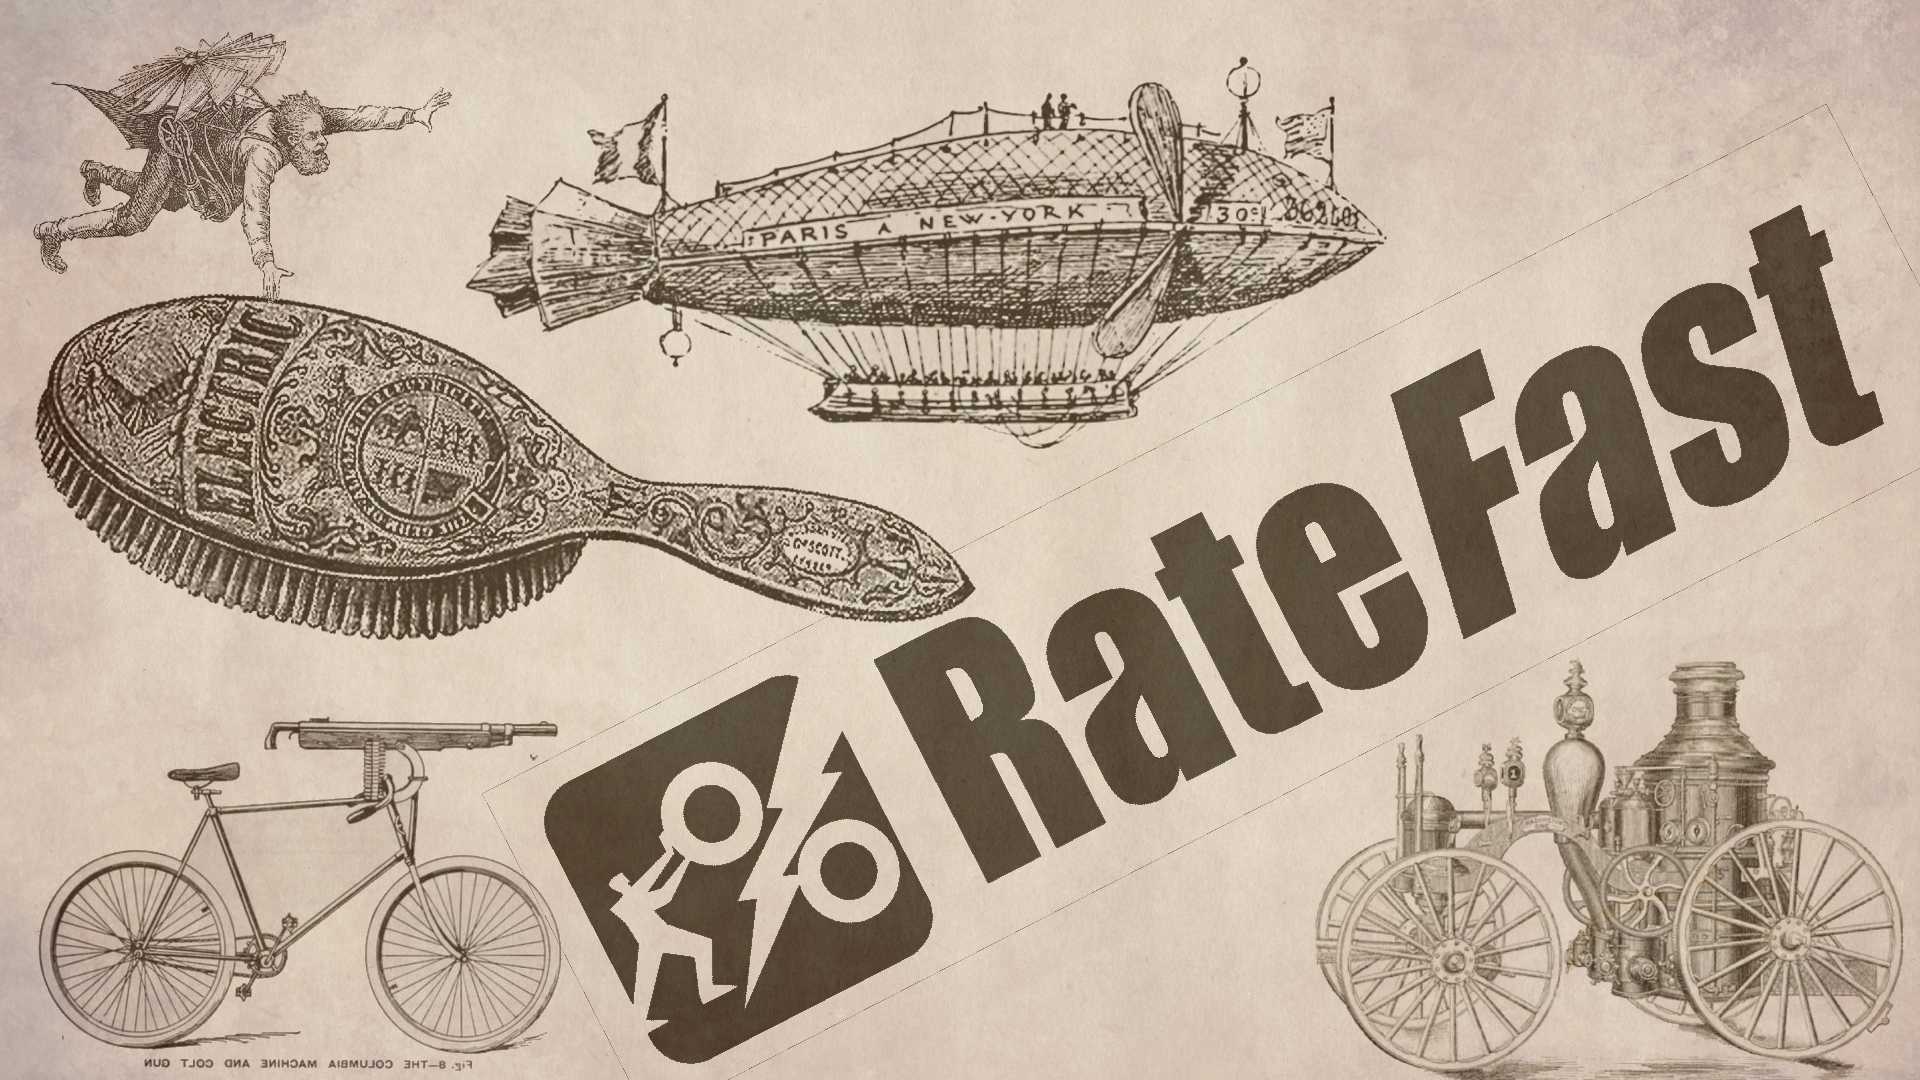 Work Comp Win: RateFast Receives a Patent!